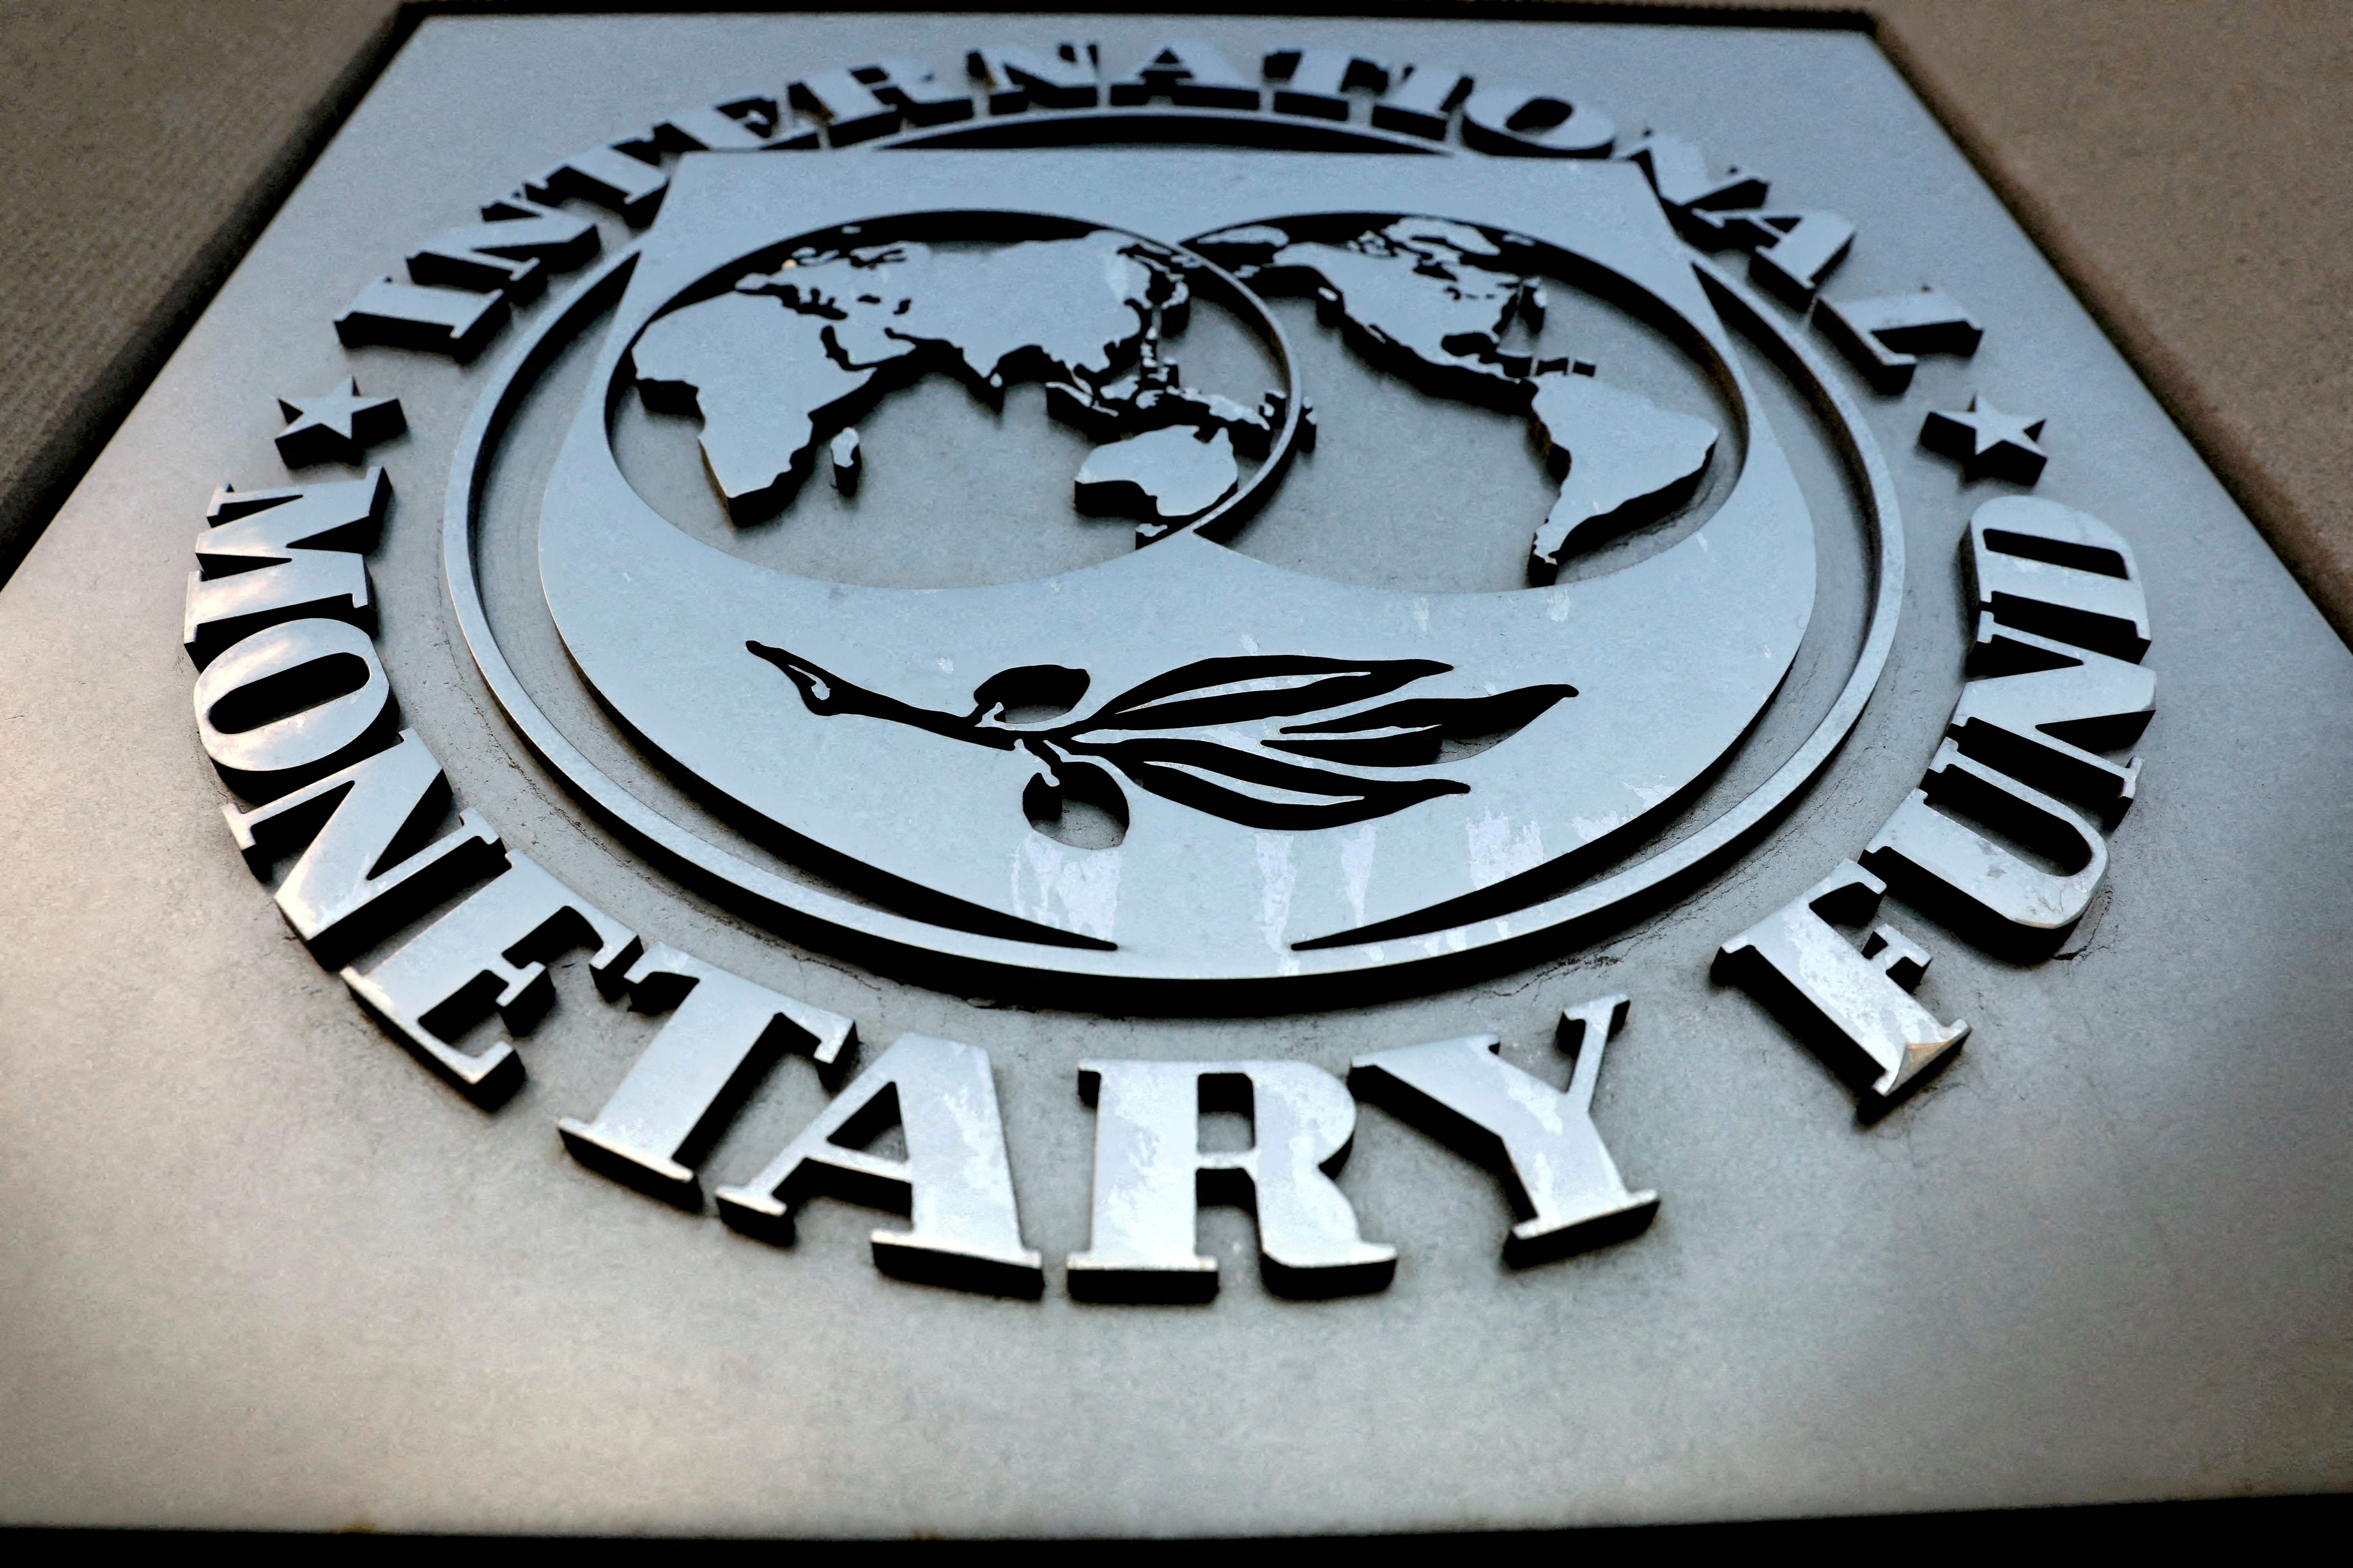 The International Monetary Fund logo appears outside the headquarters building in Washington